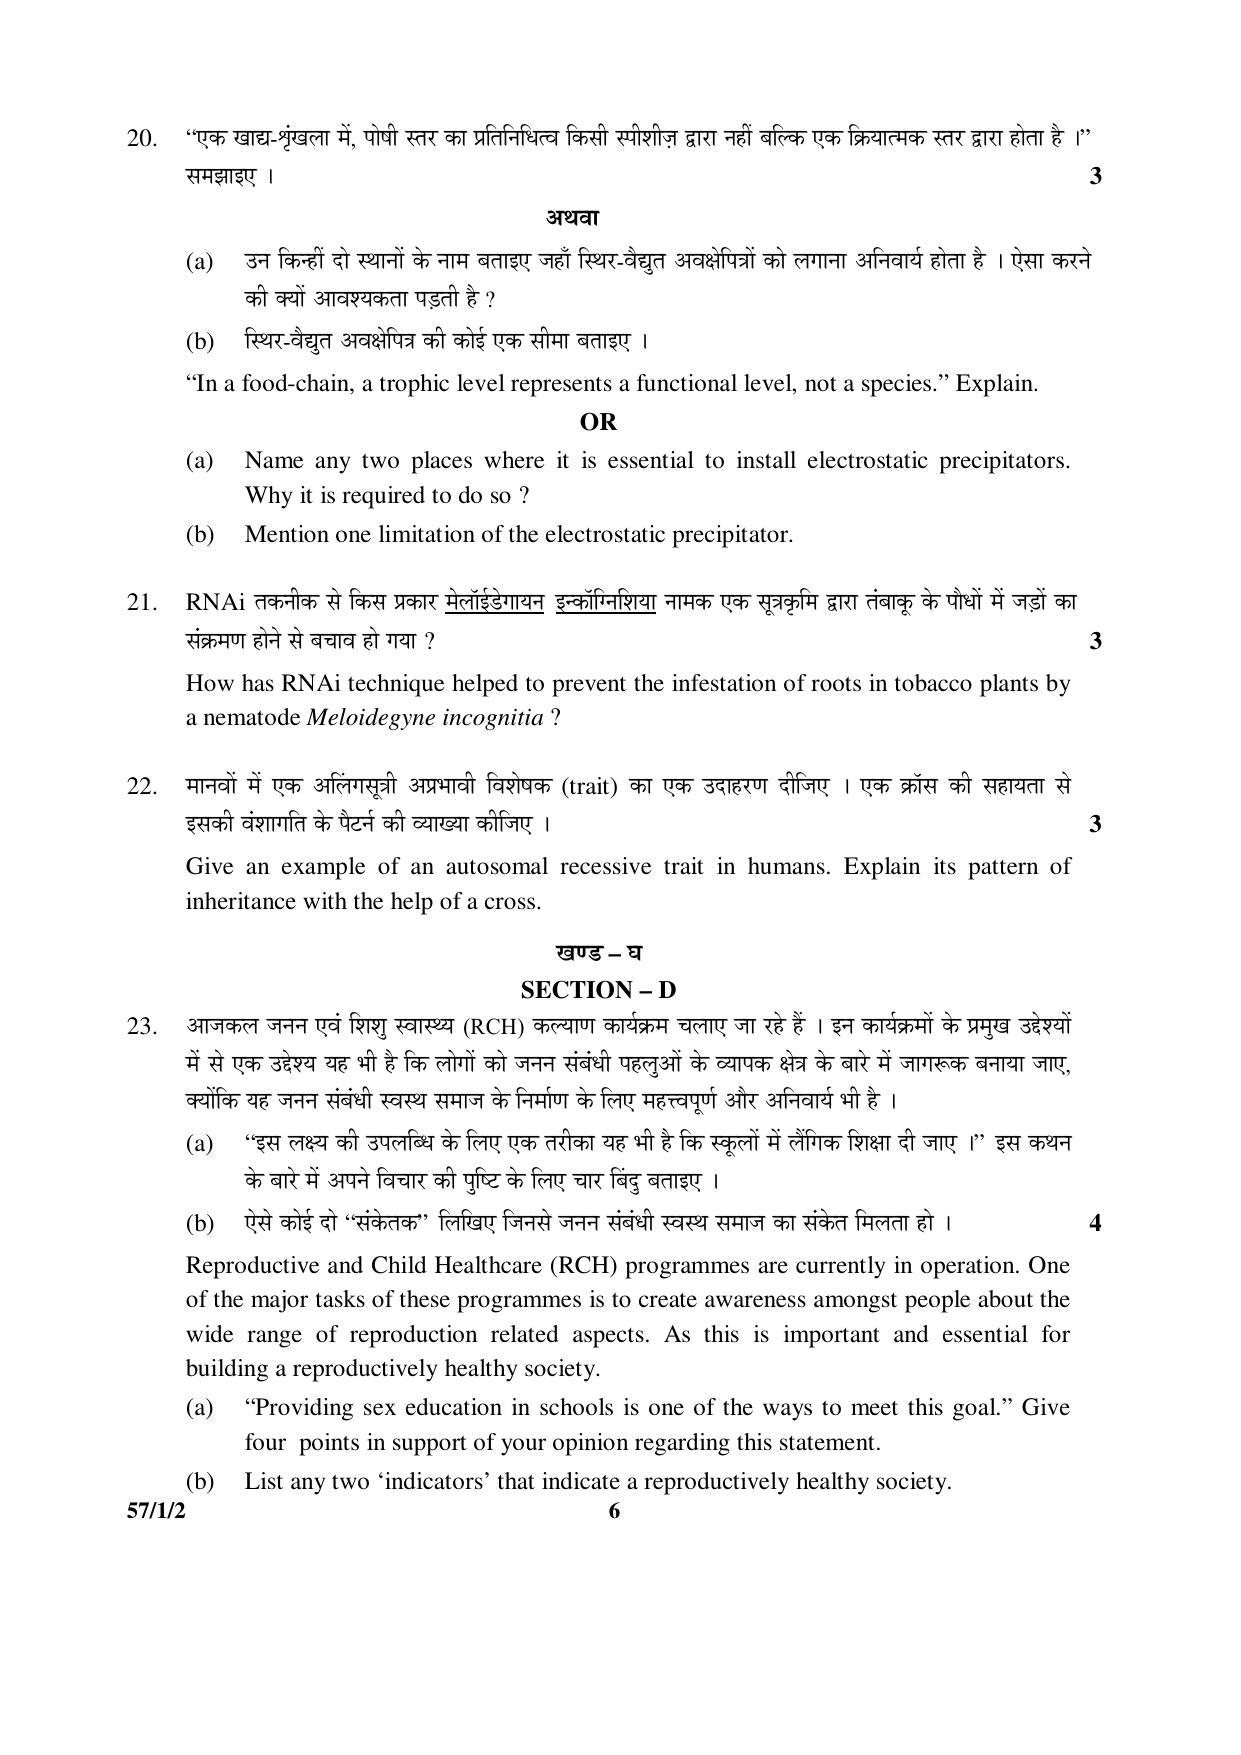 CBSE Class 12 57-1-2 BIOLOGY 2016 Question Paper - Page 6